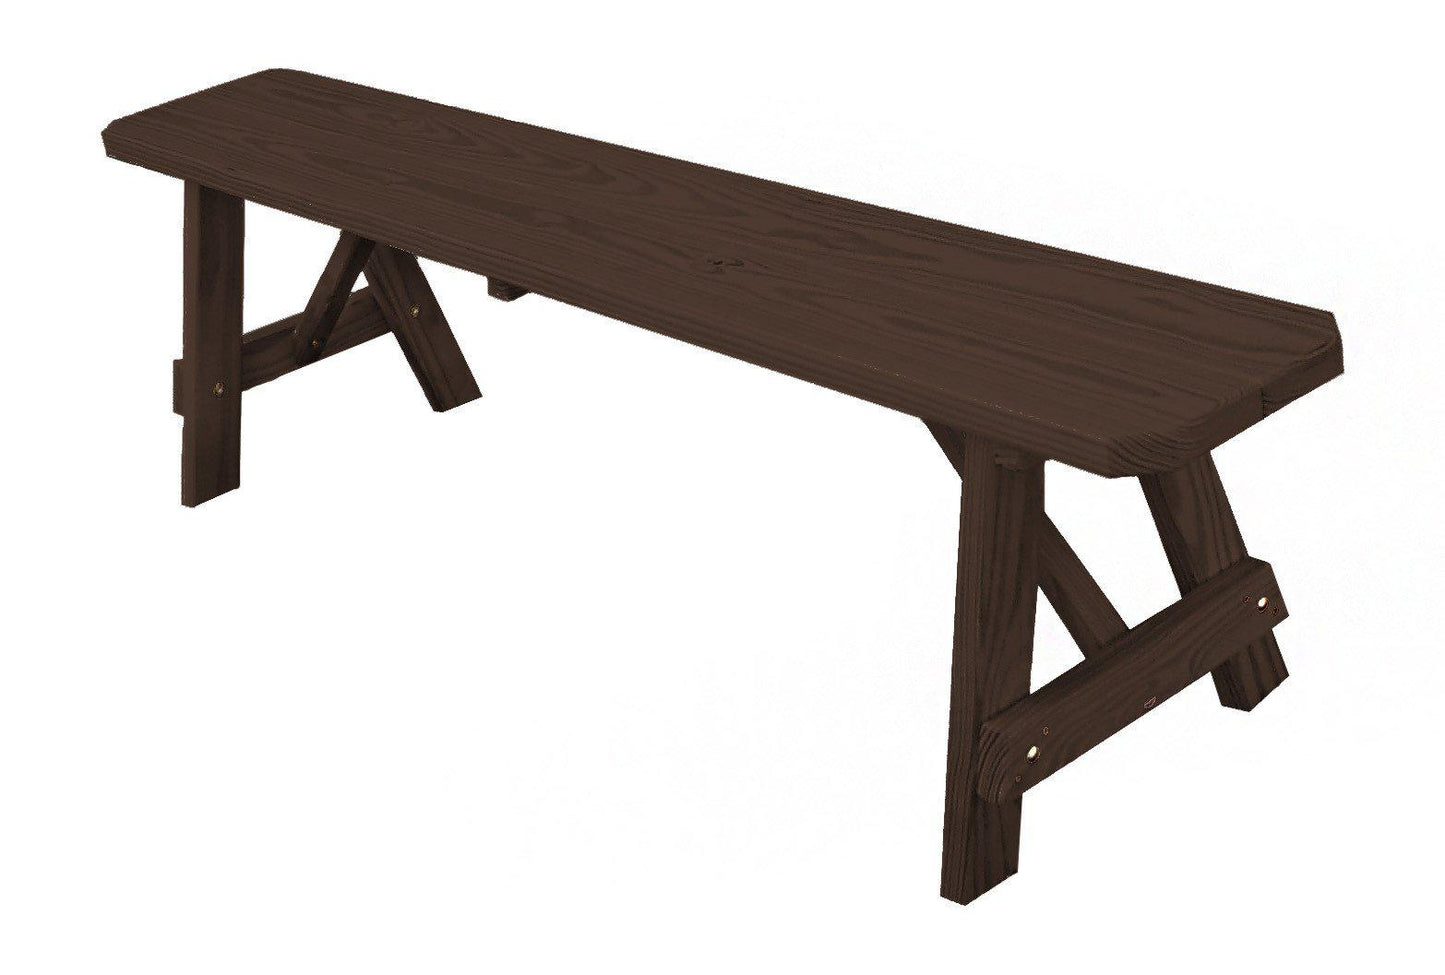 A&L Furniture Co. Pressure Treated Pine 70" Traditional Bench Only - LEAD TIME TO SHIP 10 BUSINESS DAYS